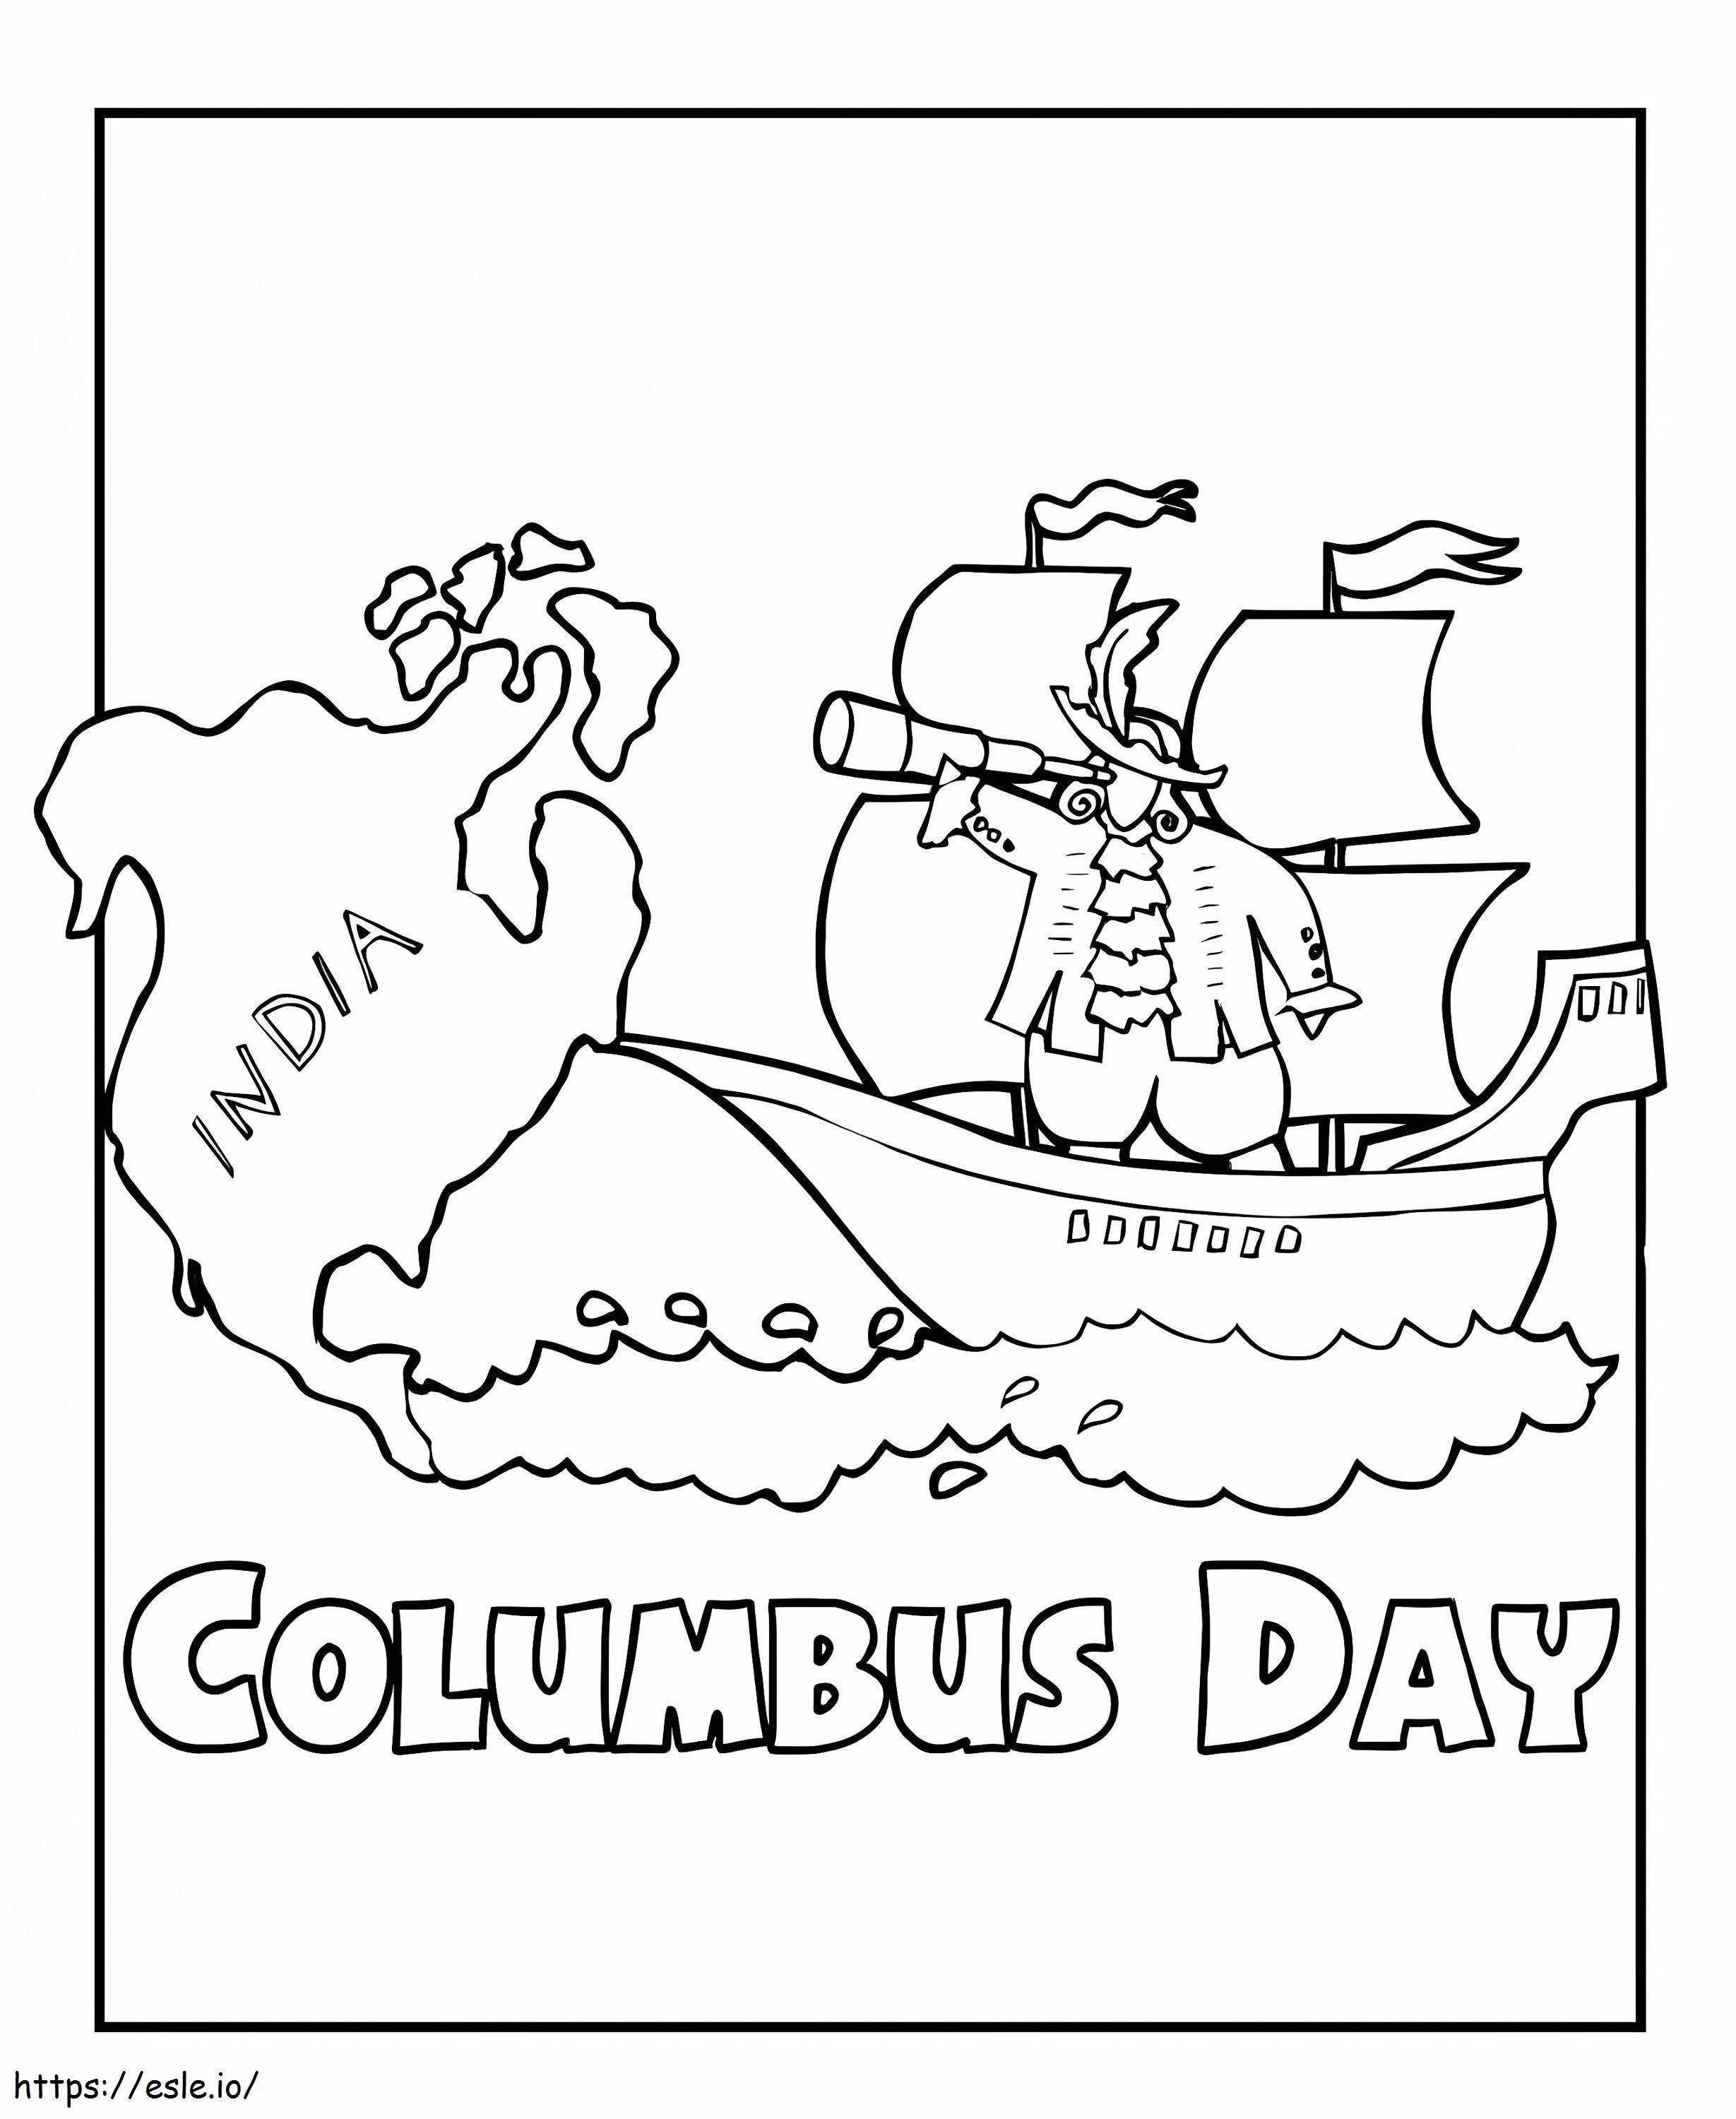 Columbus Day 1 coloring page